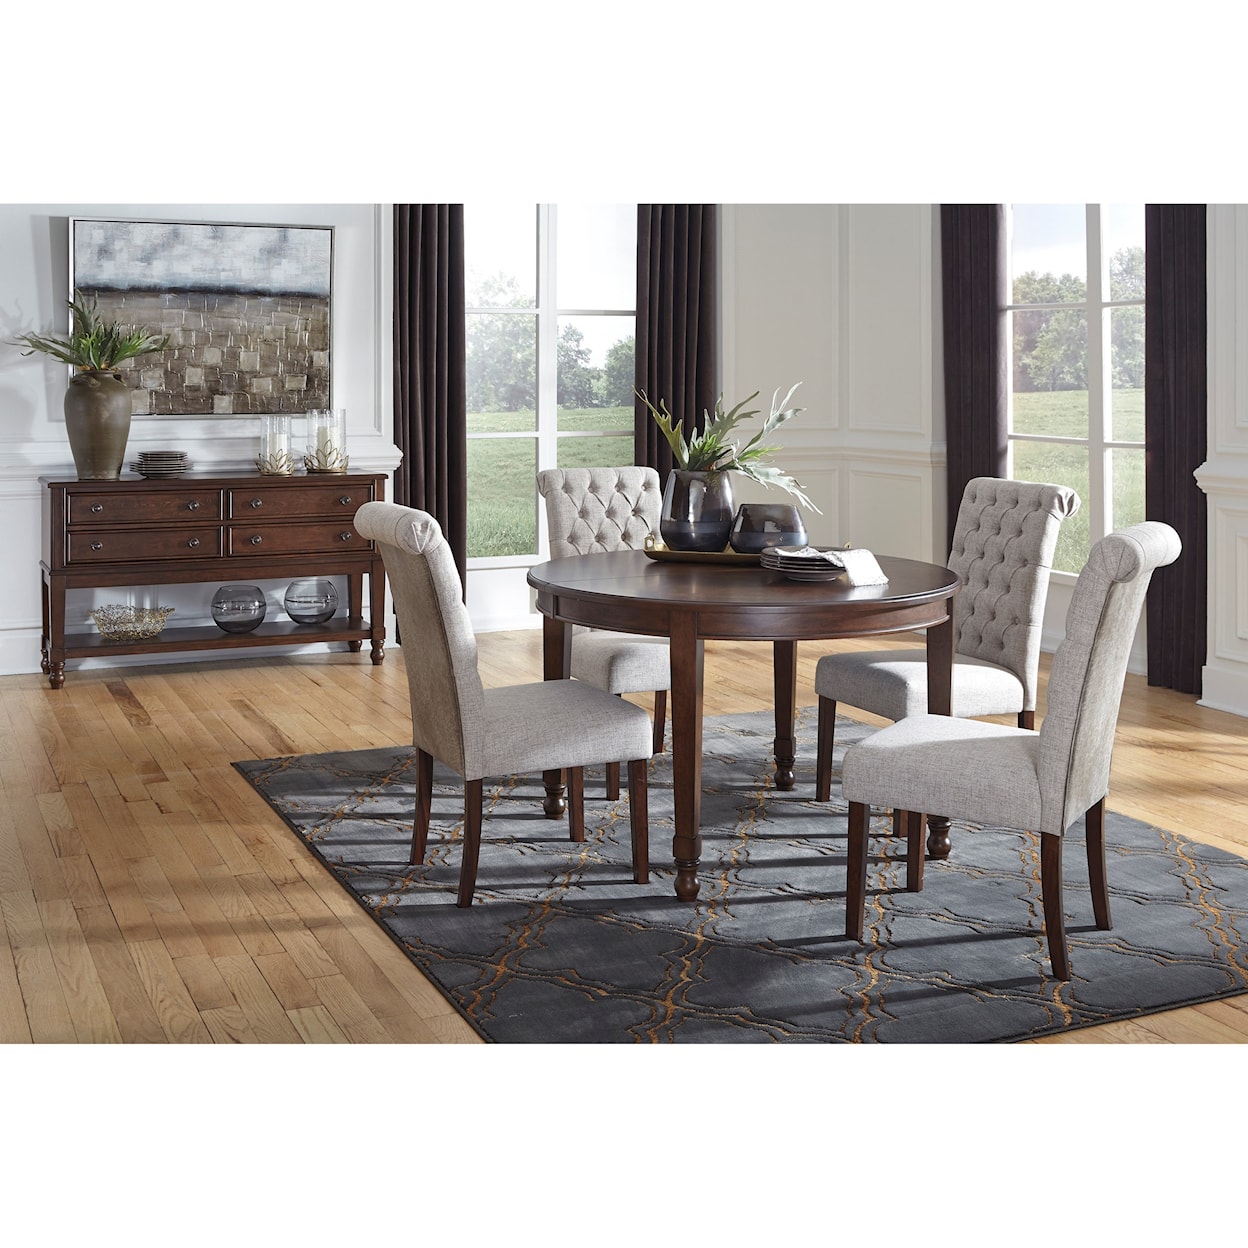 Signature Design by Ashley Adinton Casual Dining Room Group